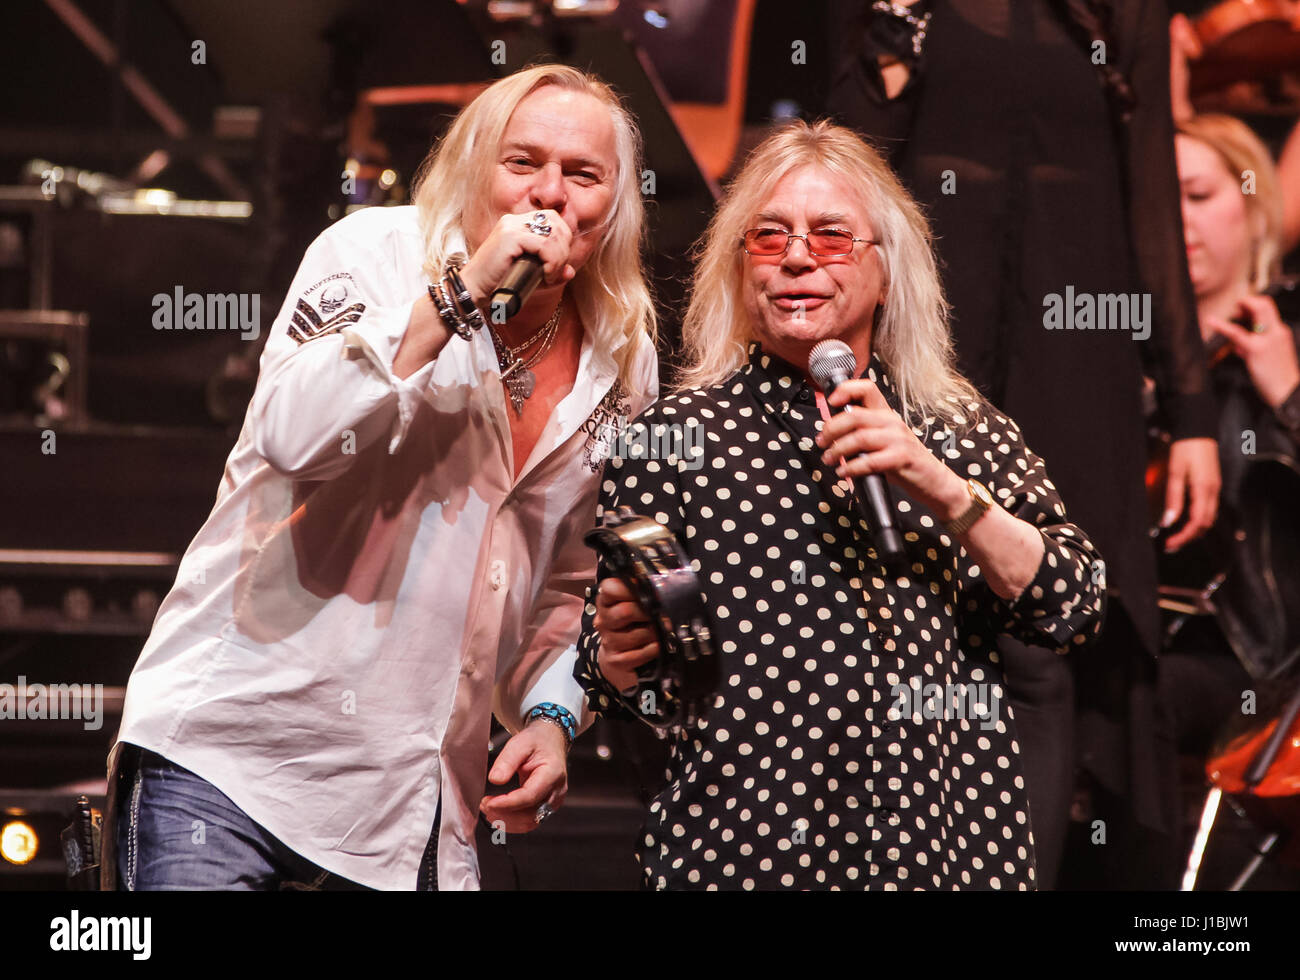 Wetzlar, Germany, 13th April, 2017. Bernie Shaw, singer of british hard rock band Uriah Heep, and Bob Catley, singer of british hard rock band Magnum, perform at Rock meets Classic 2017, concert show with rock legends as soloists, accompanied by Mat Sinner Band and Bohemian Symphony Orchestra Prague. Venue: Rittal-Arena, Wetzlar, Germany. Fotocredit: Christian Lademann Stock Photo